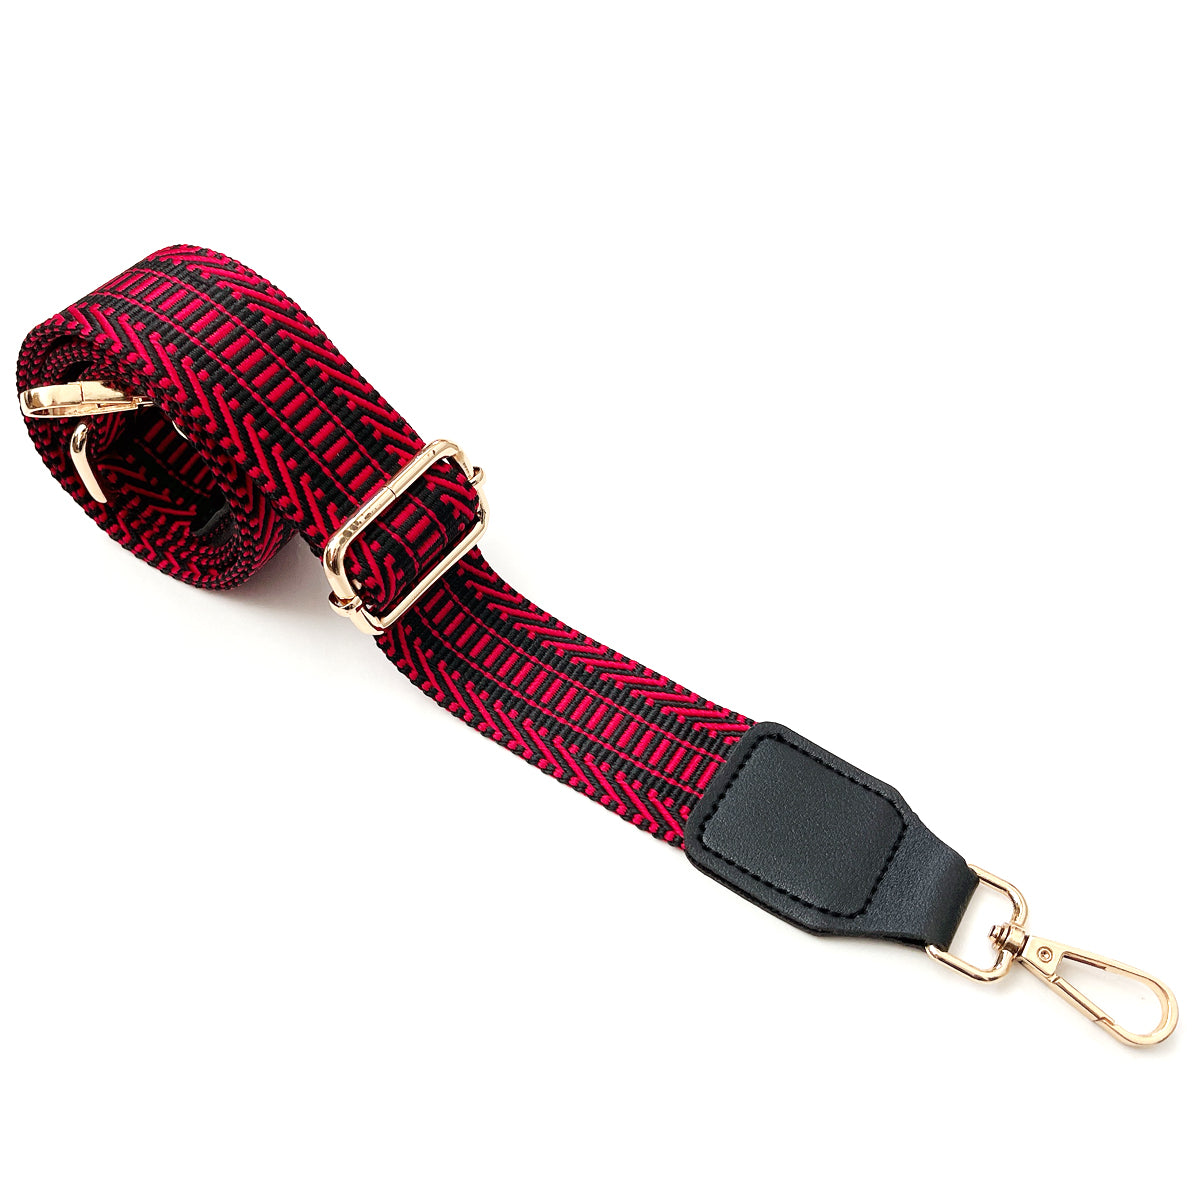 Straps for Purses, handbags.All Embossed Genuine Leather, Custom Up to 47” Adjustable (standard)or Any Size Required Red